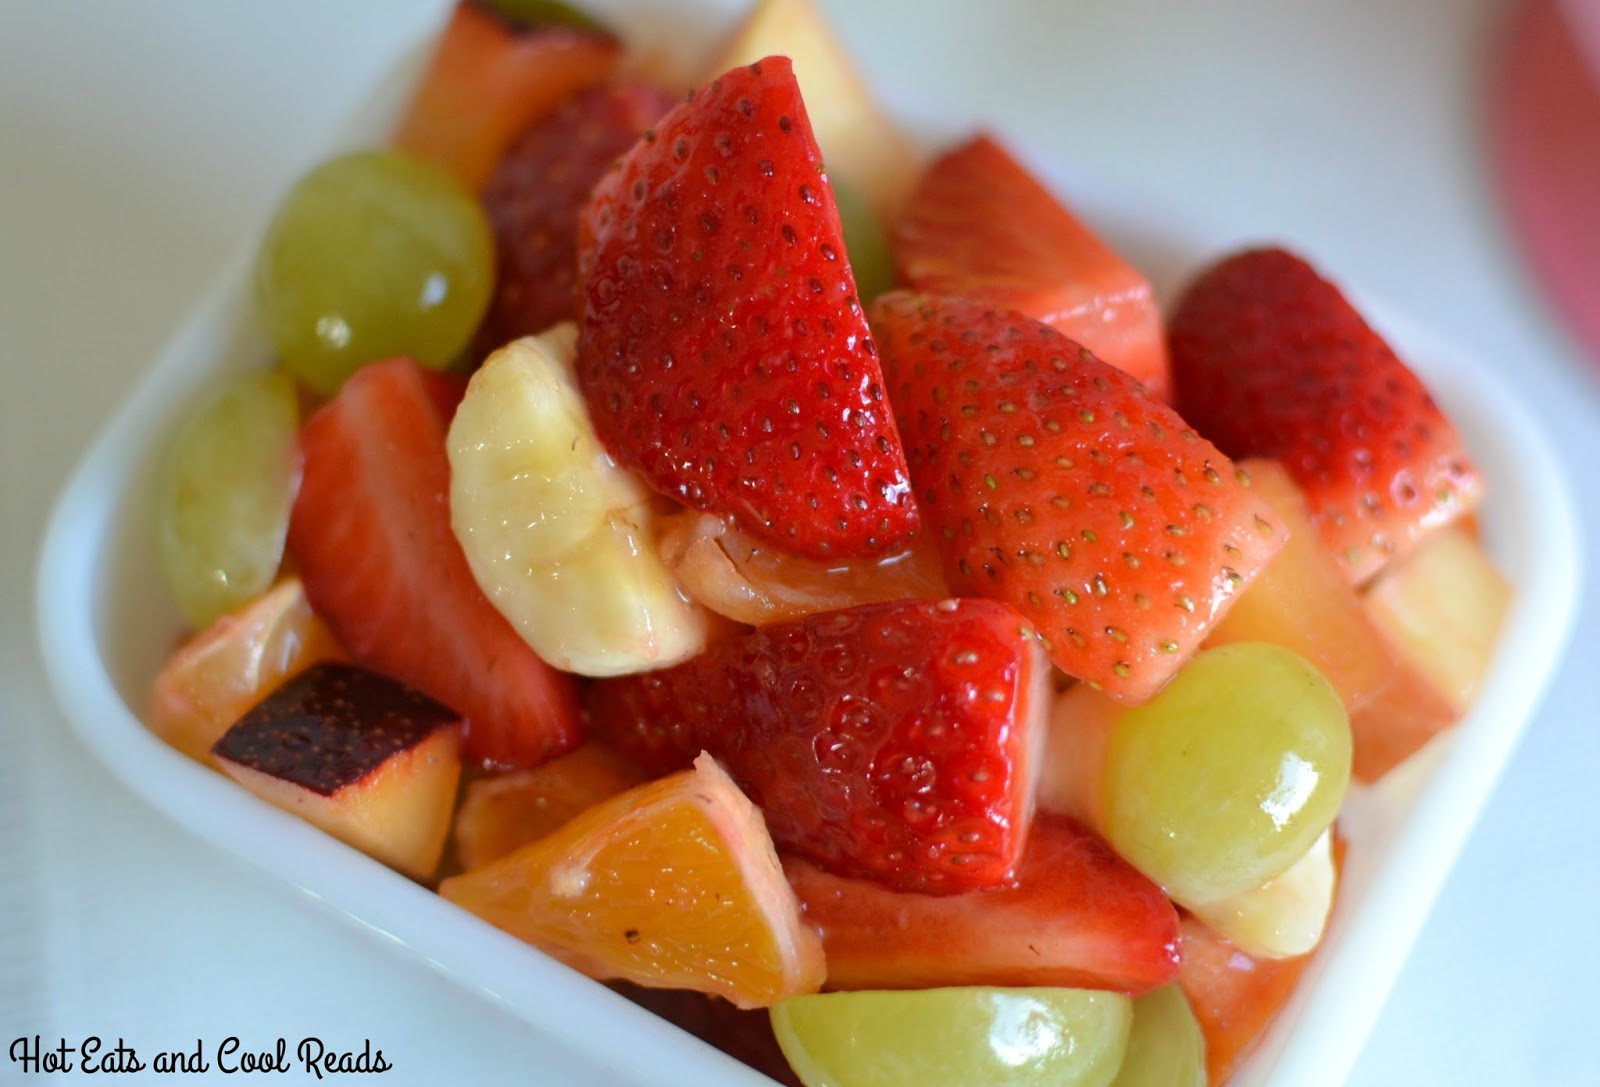 Fruit Breakfast Recipes
 Hot Eats and Cool Reads Best Ever Breakfast or Brunch